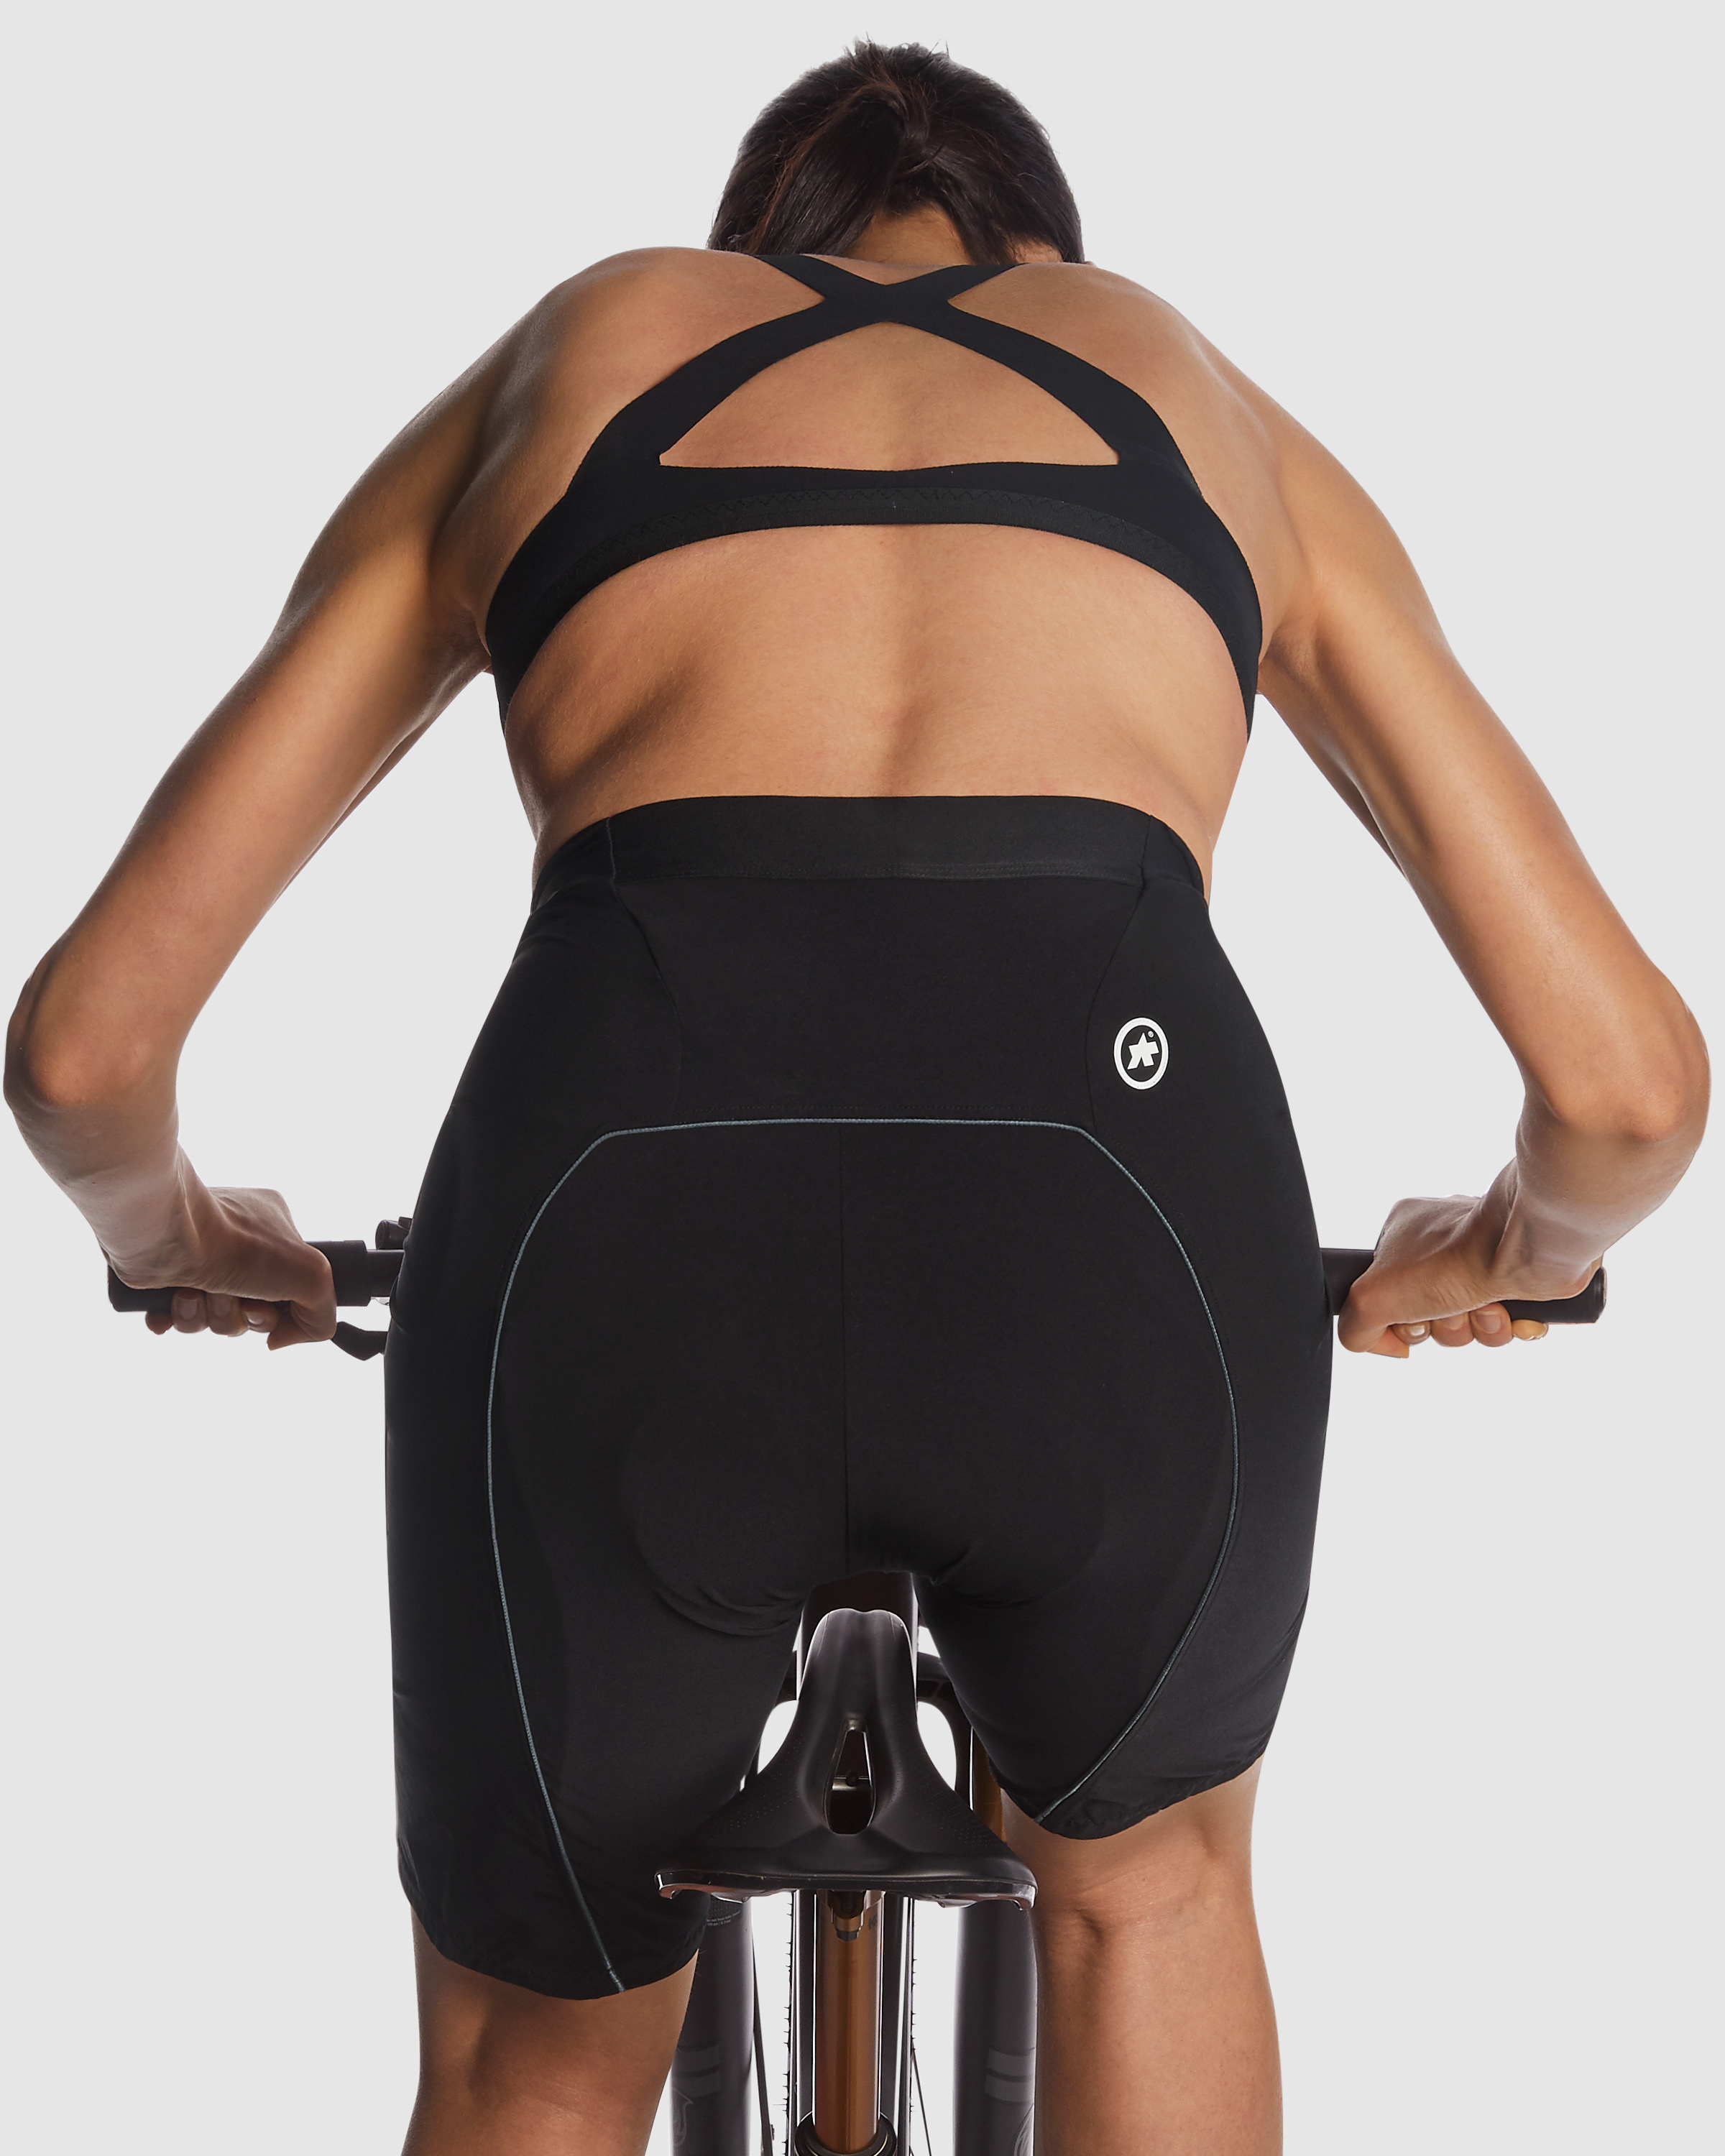 TRAIL Women's Liner Shorts - ASSOS Of Switzerland - Official Outlet